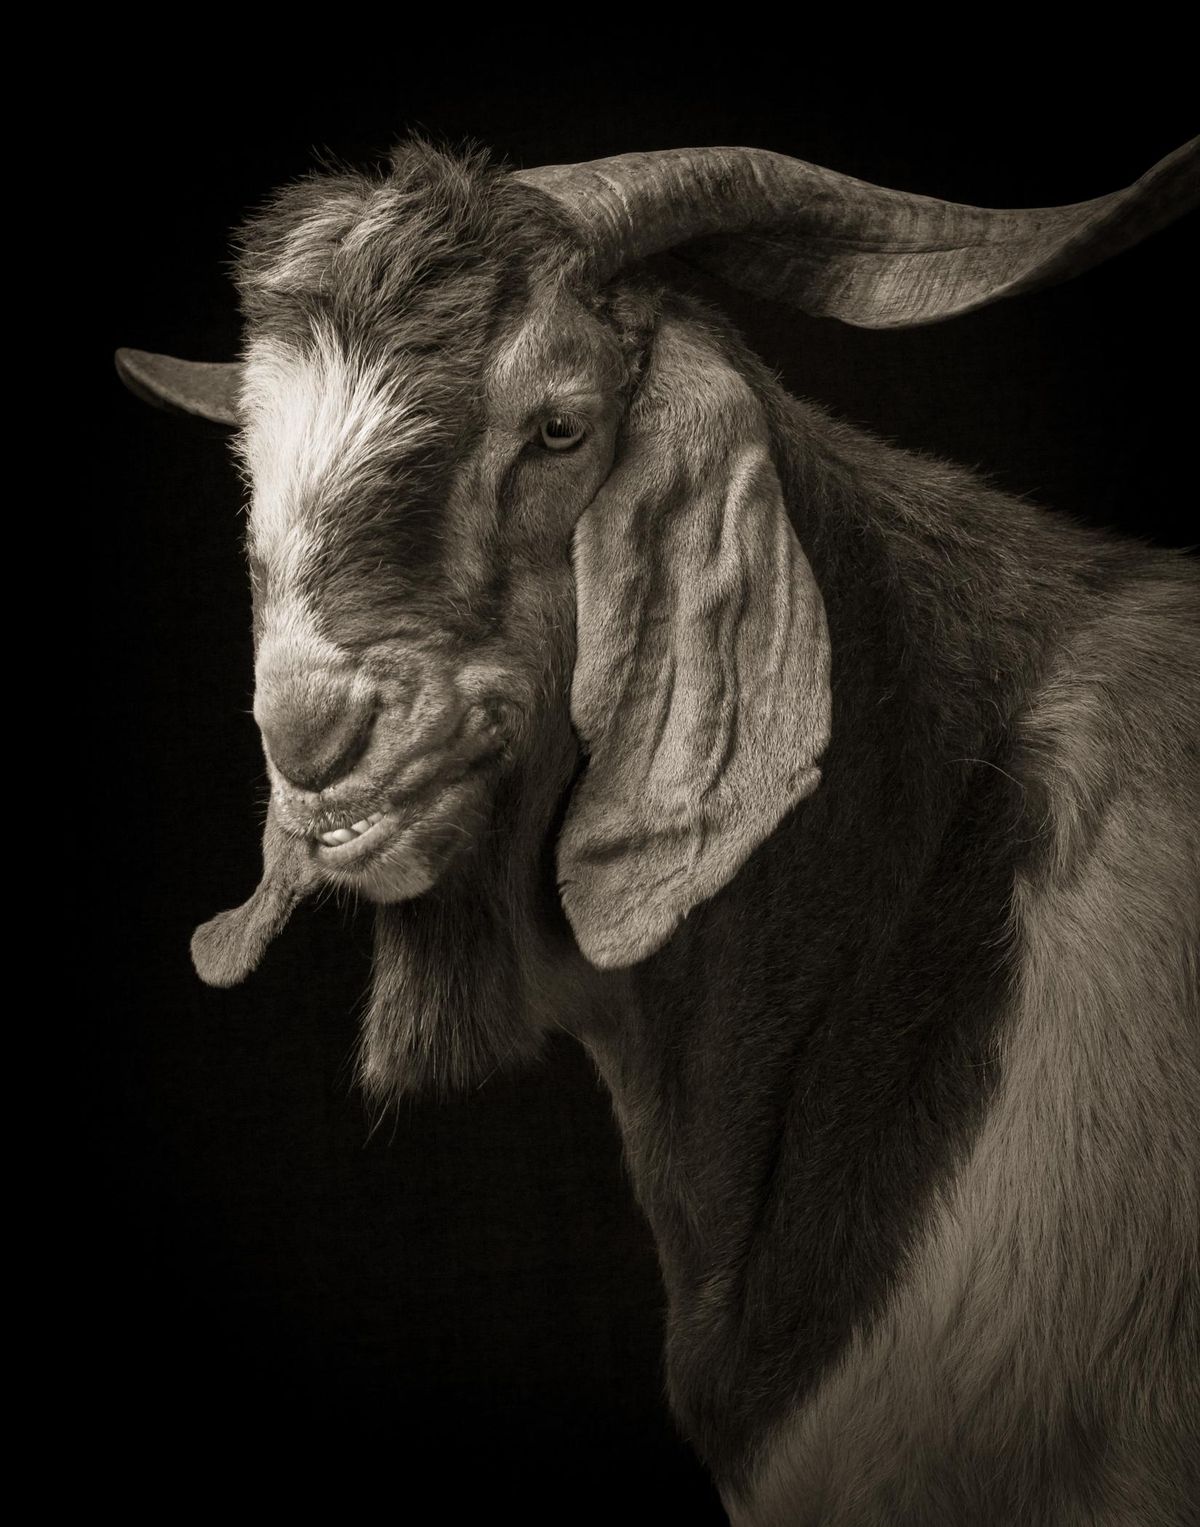 “Jake No. 1,” from Kevin Horan’s “Goats and Sheep: A Portrait Farm.” (Kevin Horan)